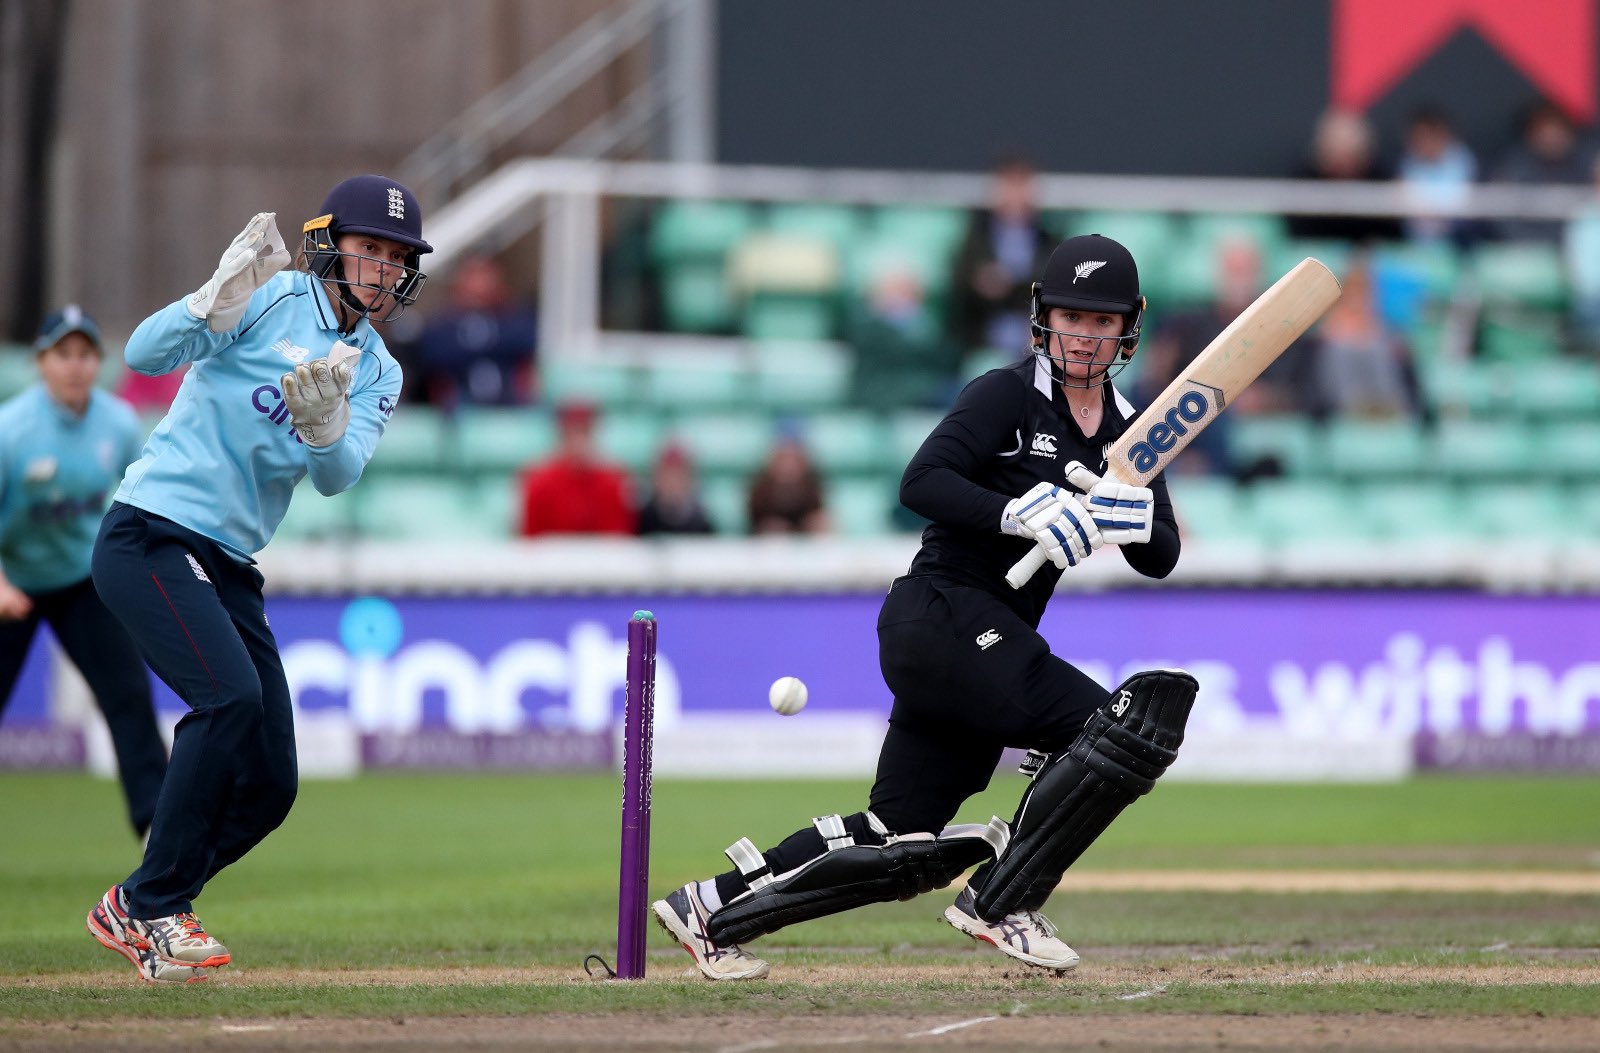 ECB receives 'threatening email" relating to New Zealand Cricket, extra security for NZ Women Players in England